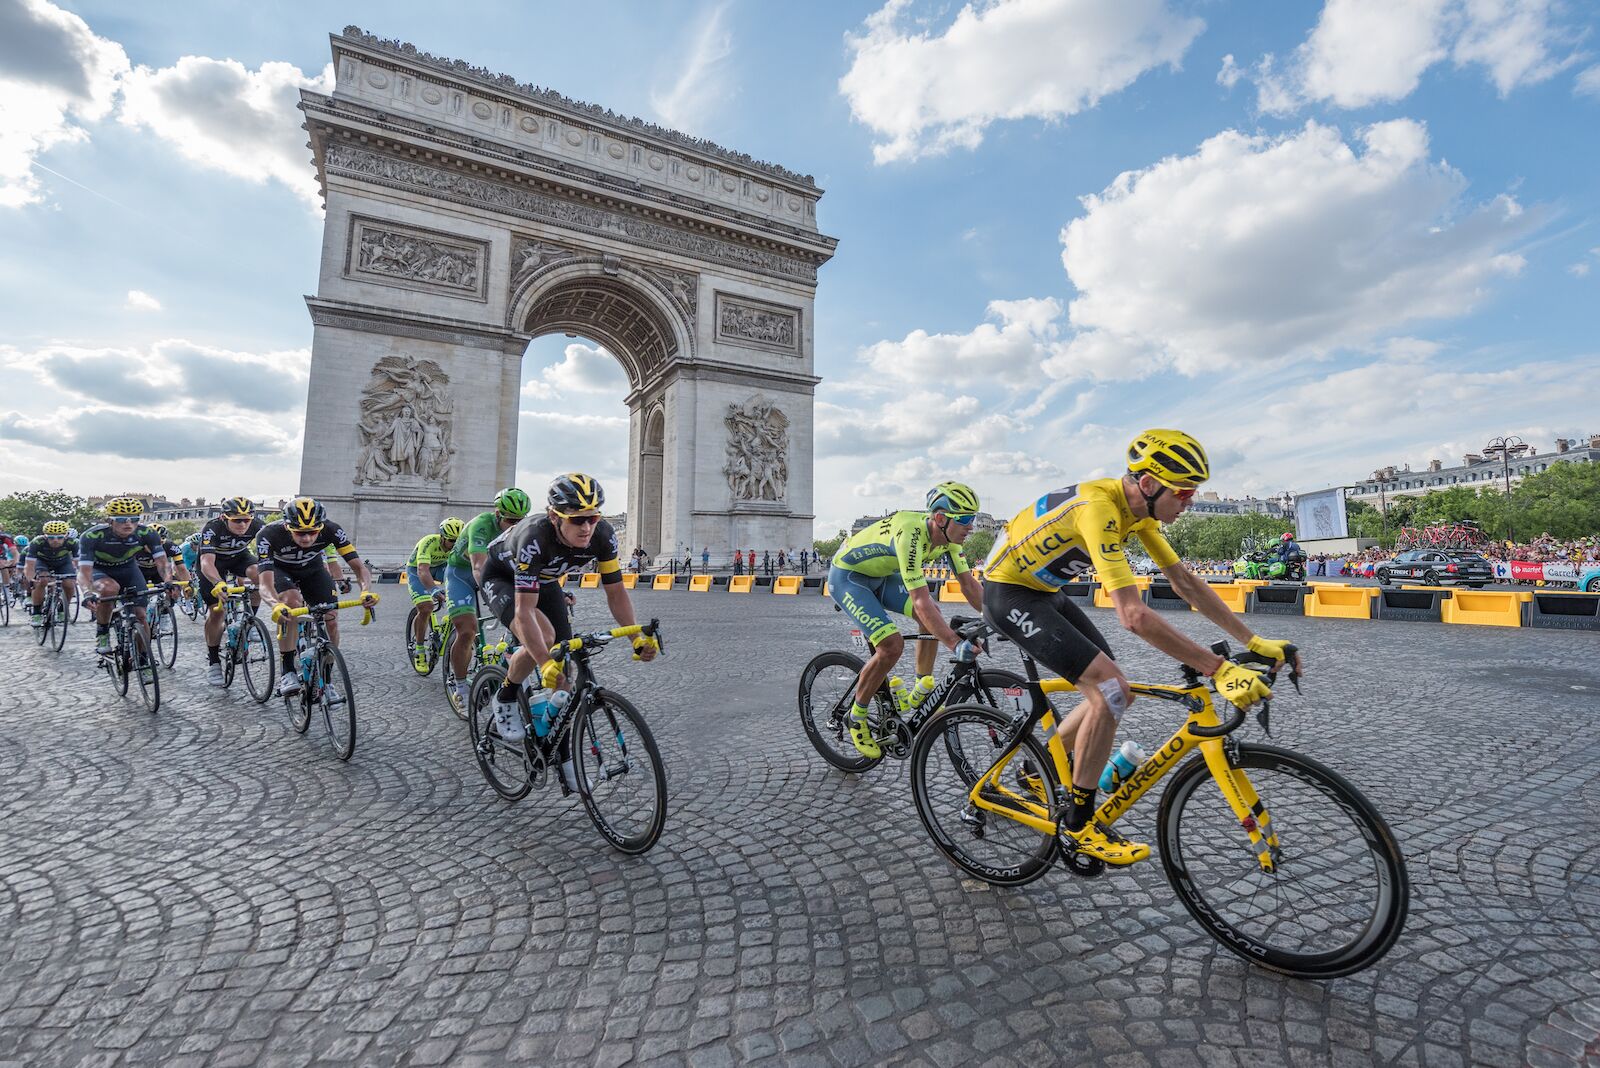 The arrival of the Tour de France is one the best events in Paris